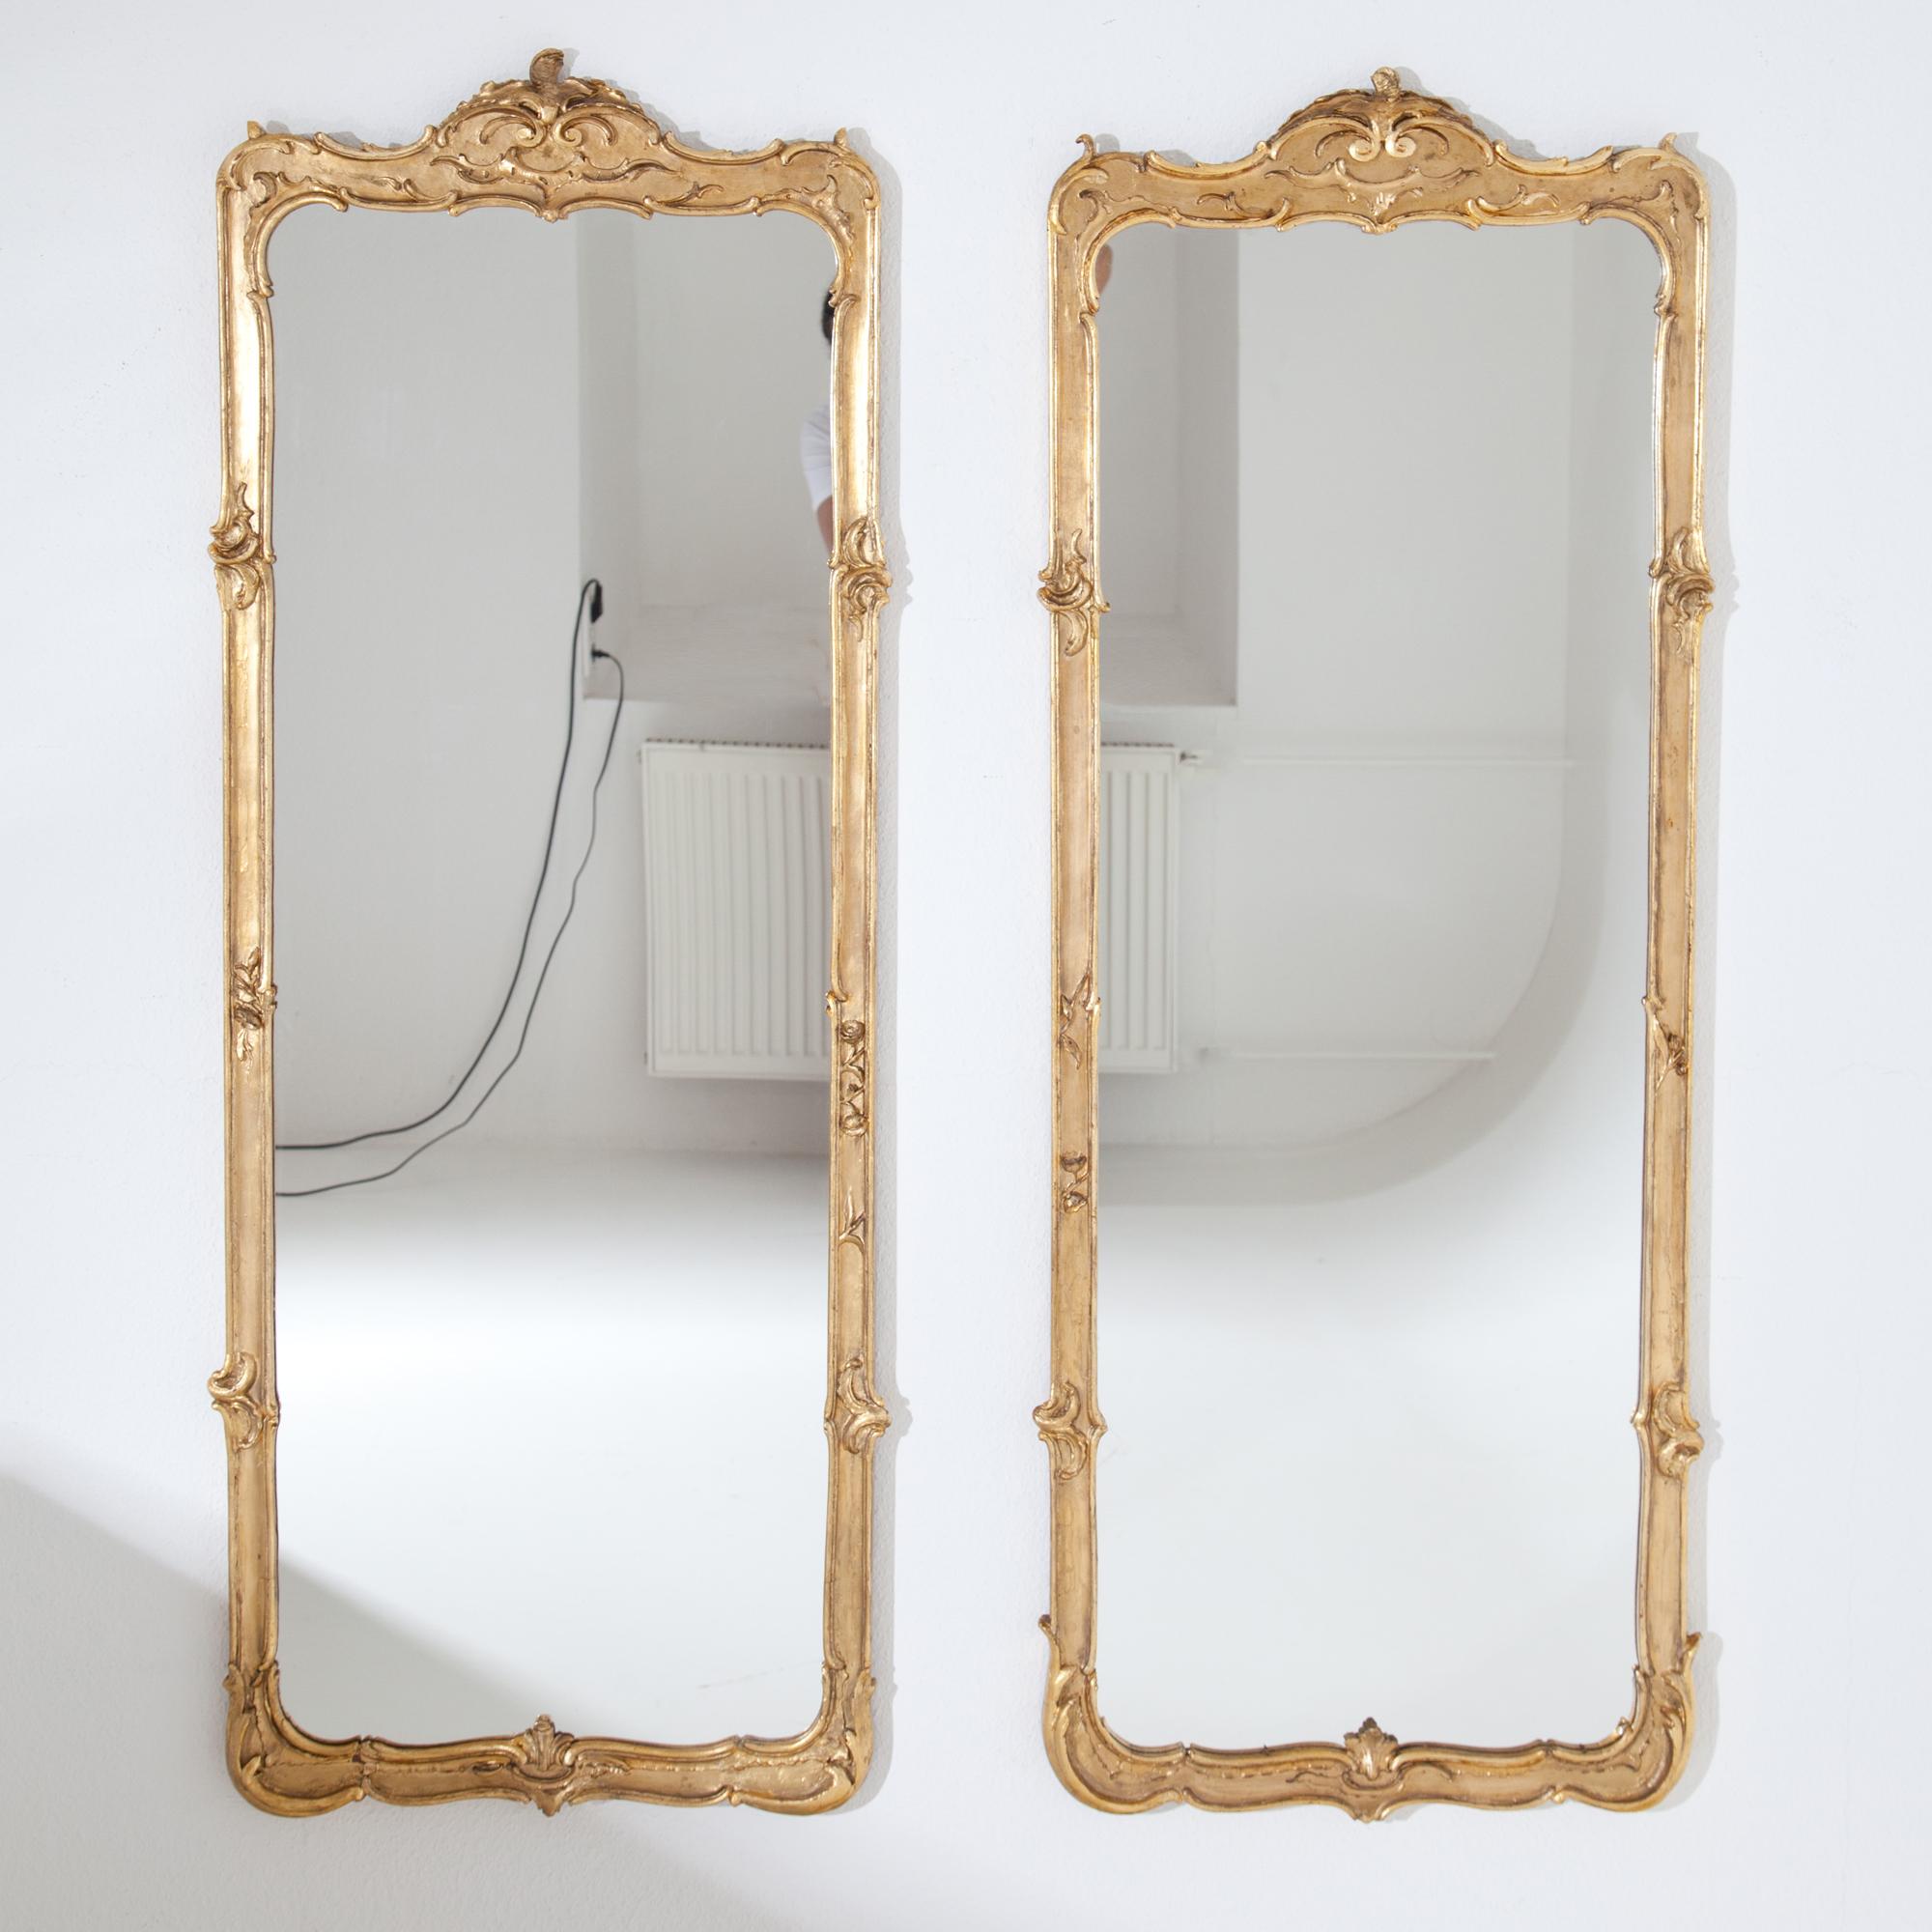 Pair of rectangular wall mirrors in golden patinated, slightly asymmetrical frames with rocaille and leaf decoration in rococo style. Gilding added. Probably former parts of a paravent converted into mirrors.